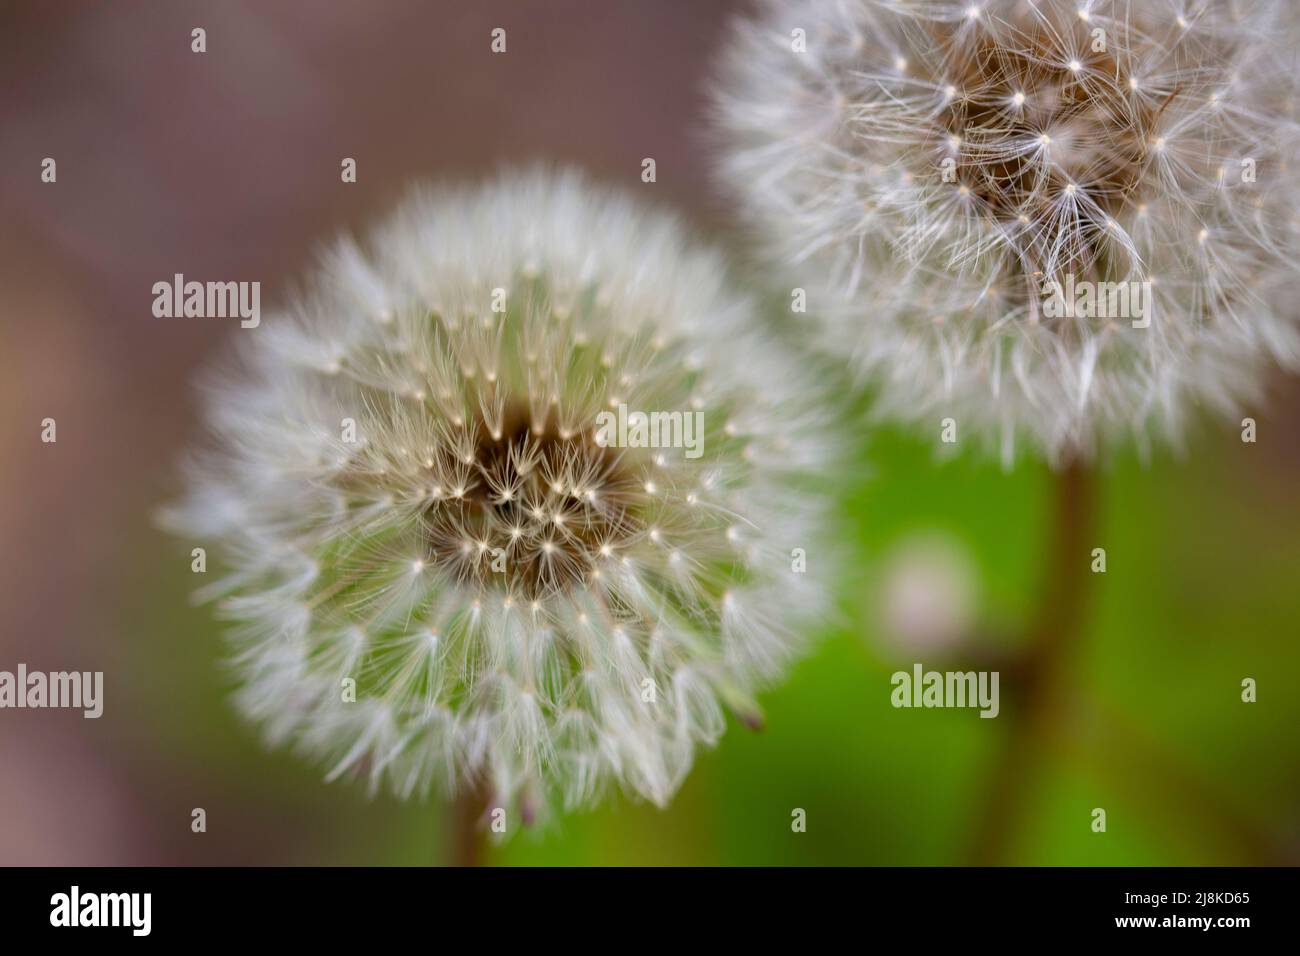 Dandelion seeds ready to float away on the breeze in late spring. Stock Photo